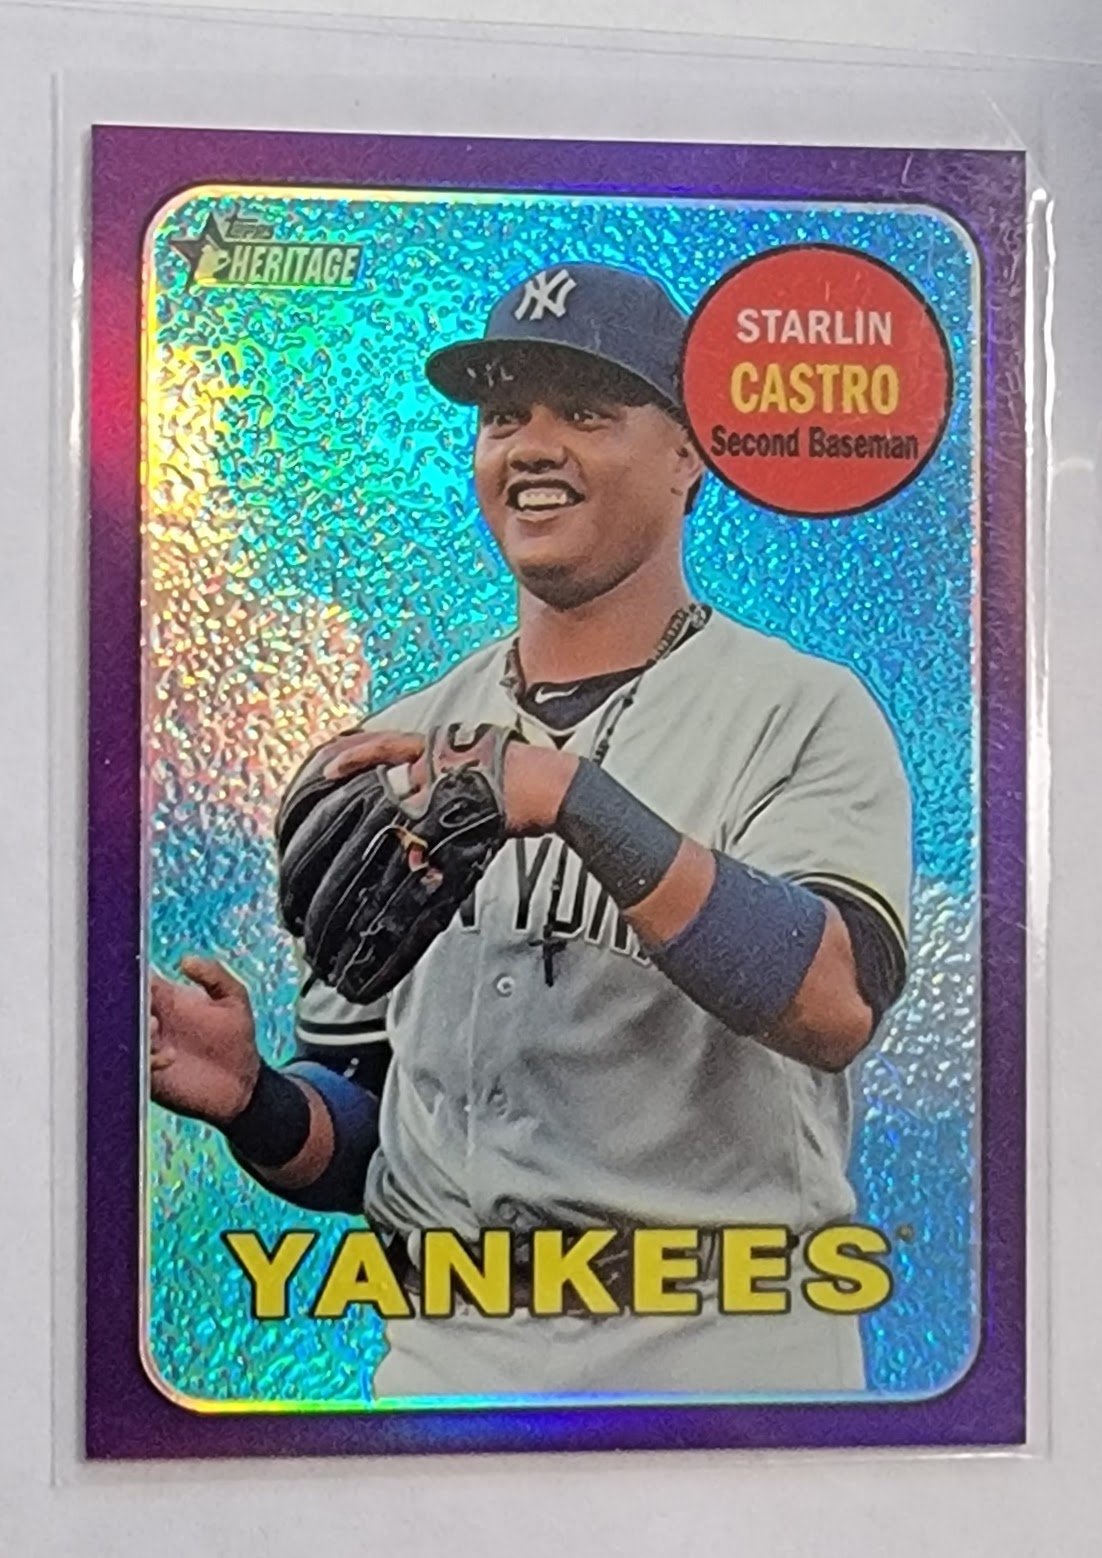 2018 Topps Heritage Starlin Castro Chrome Purple Refractor Baseball Card TPTV simple Xclusive Collectibles   